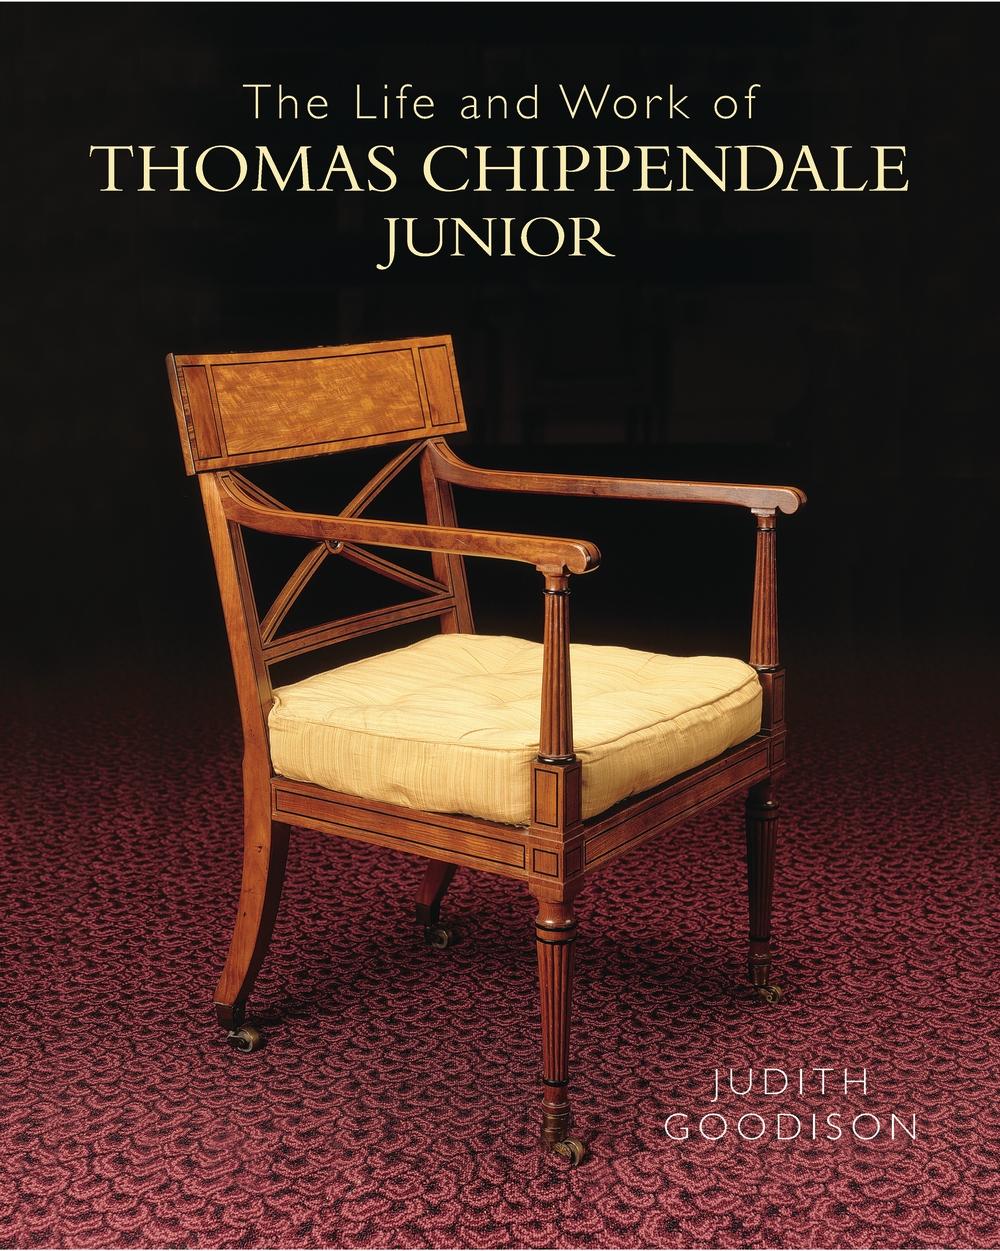 Life and Work of Thomas Chippendale Junior - Judith Goodison Goley